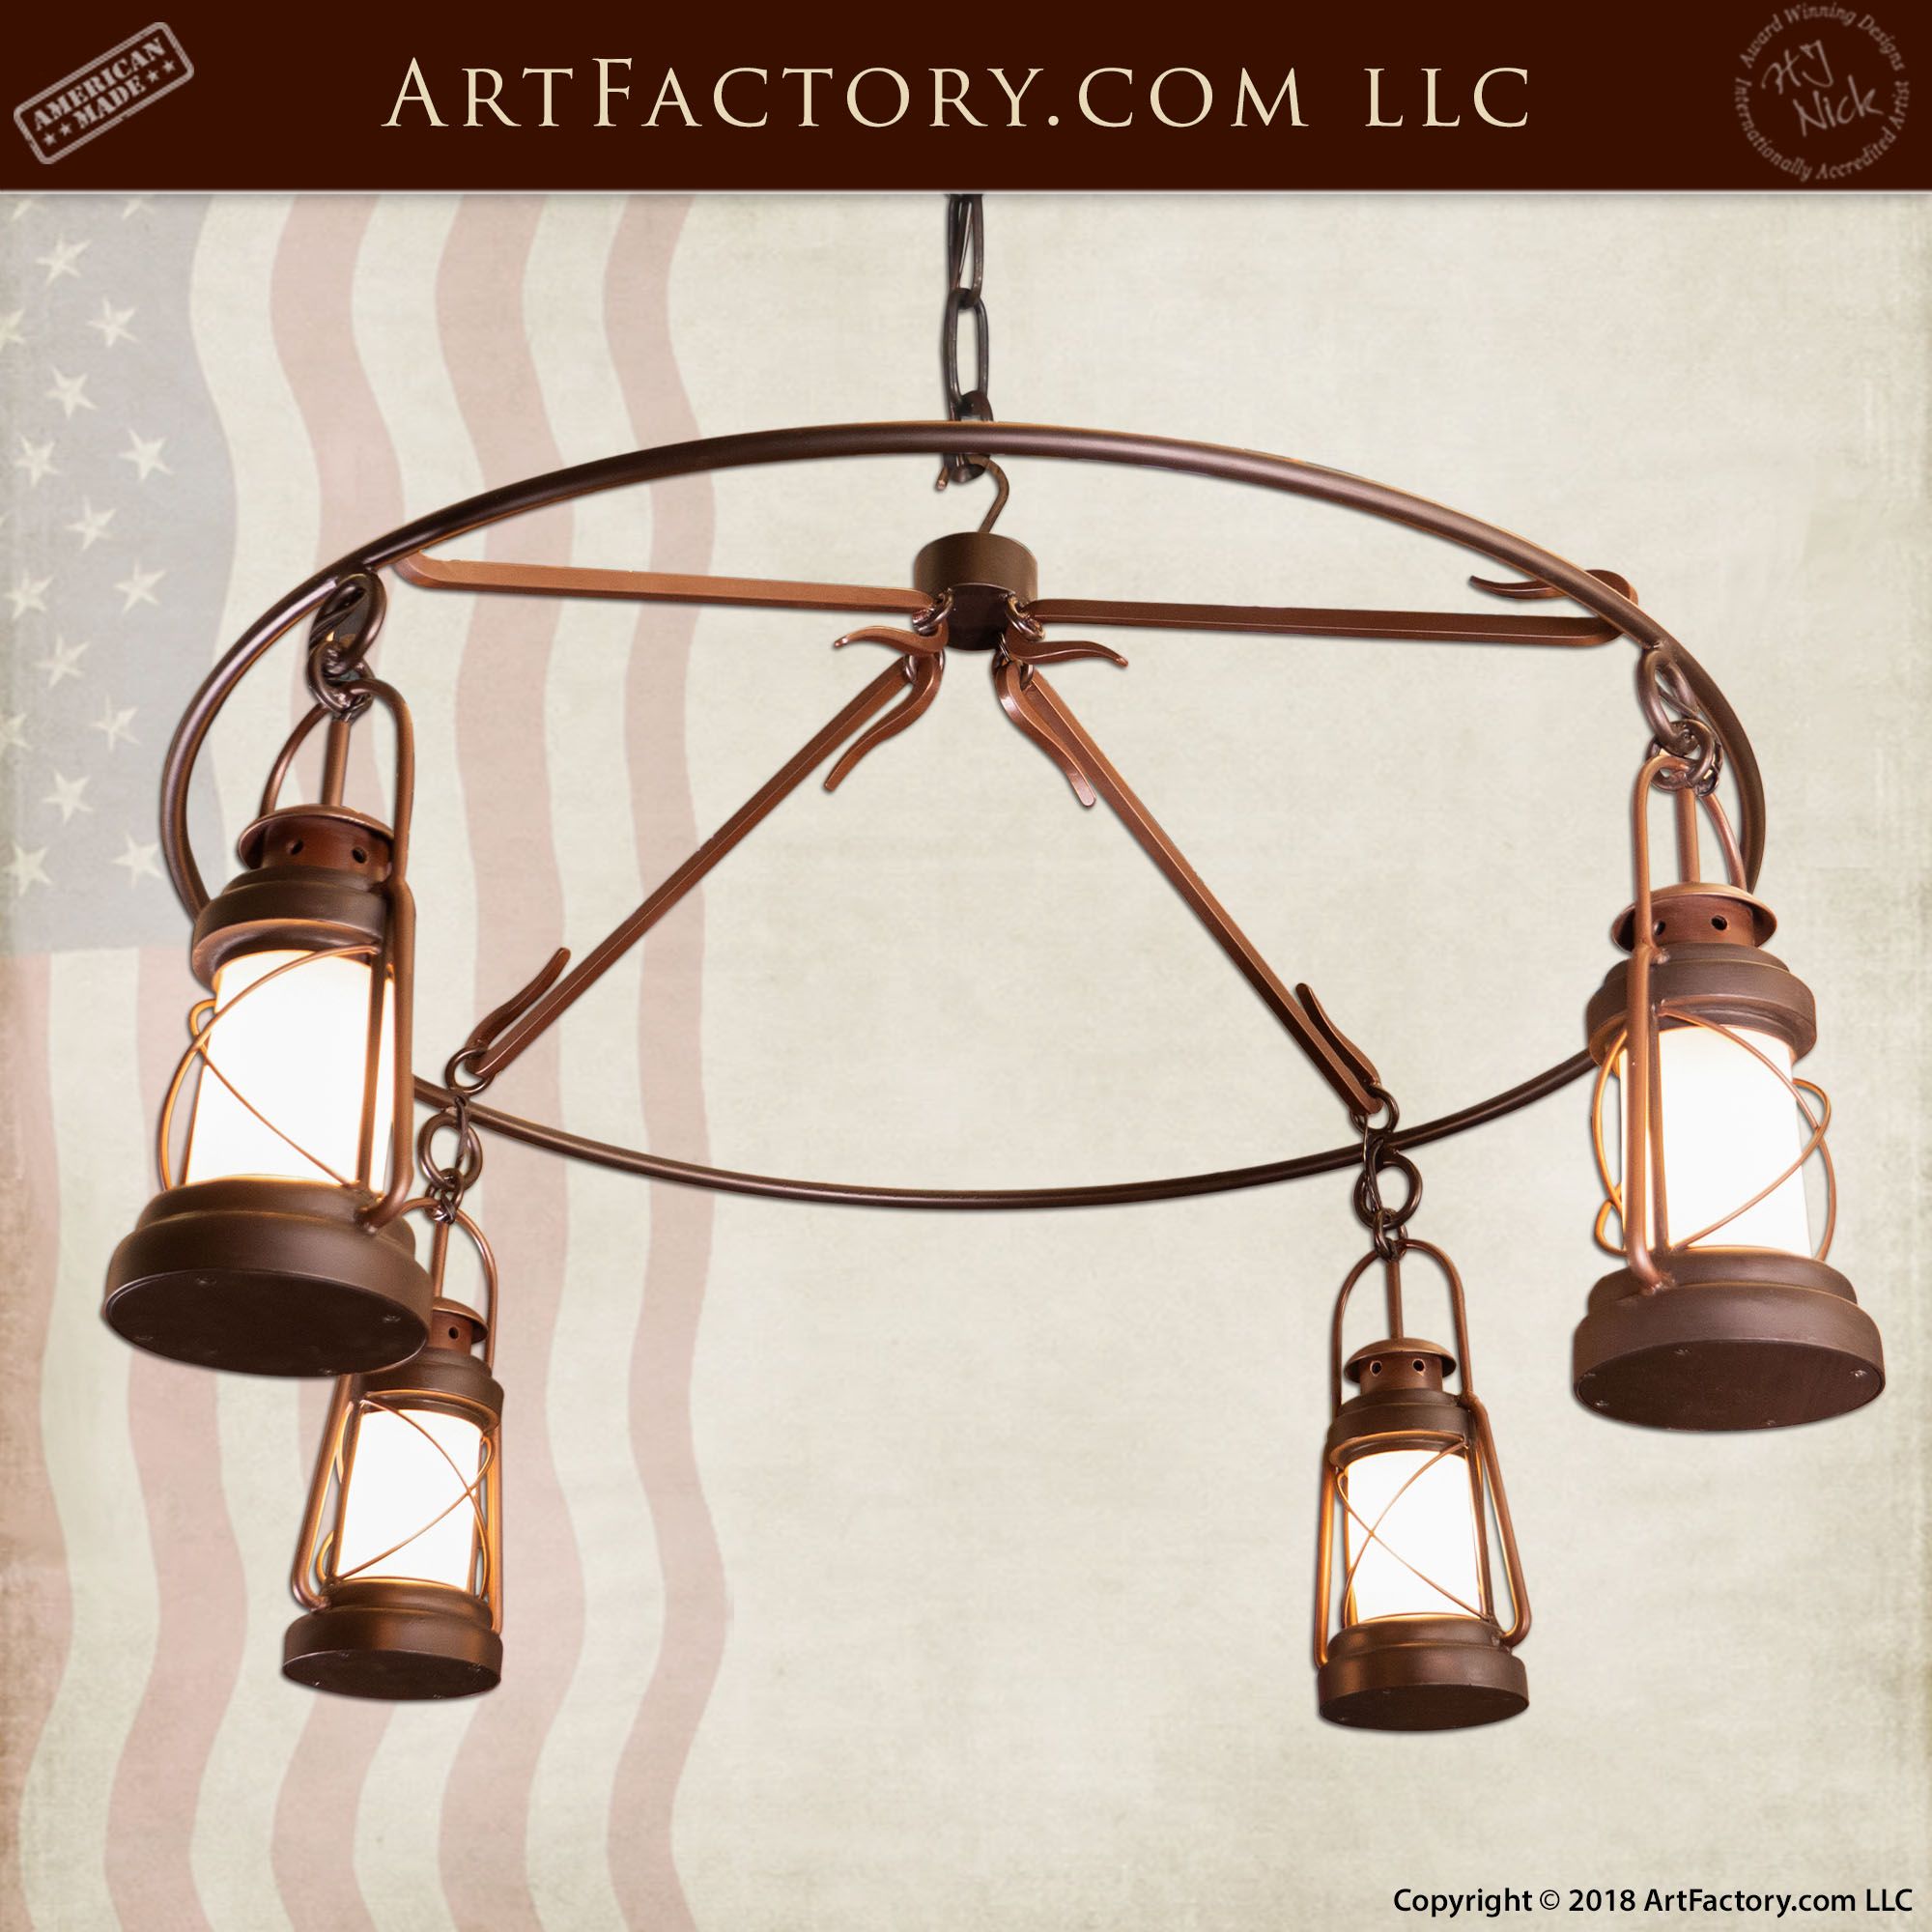 Wrought Iron Lantern Chandelier: Hand Forgedmaster Blacksmiths Intended For Forged Iron Lantern Chandeliers (View 10 of 15)